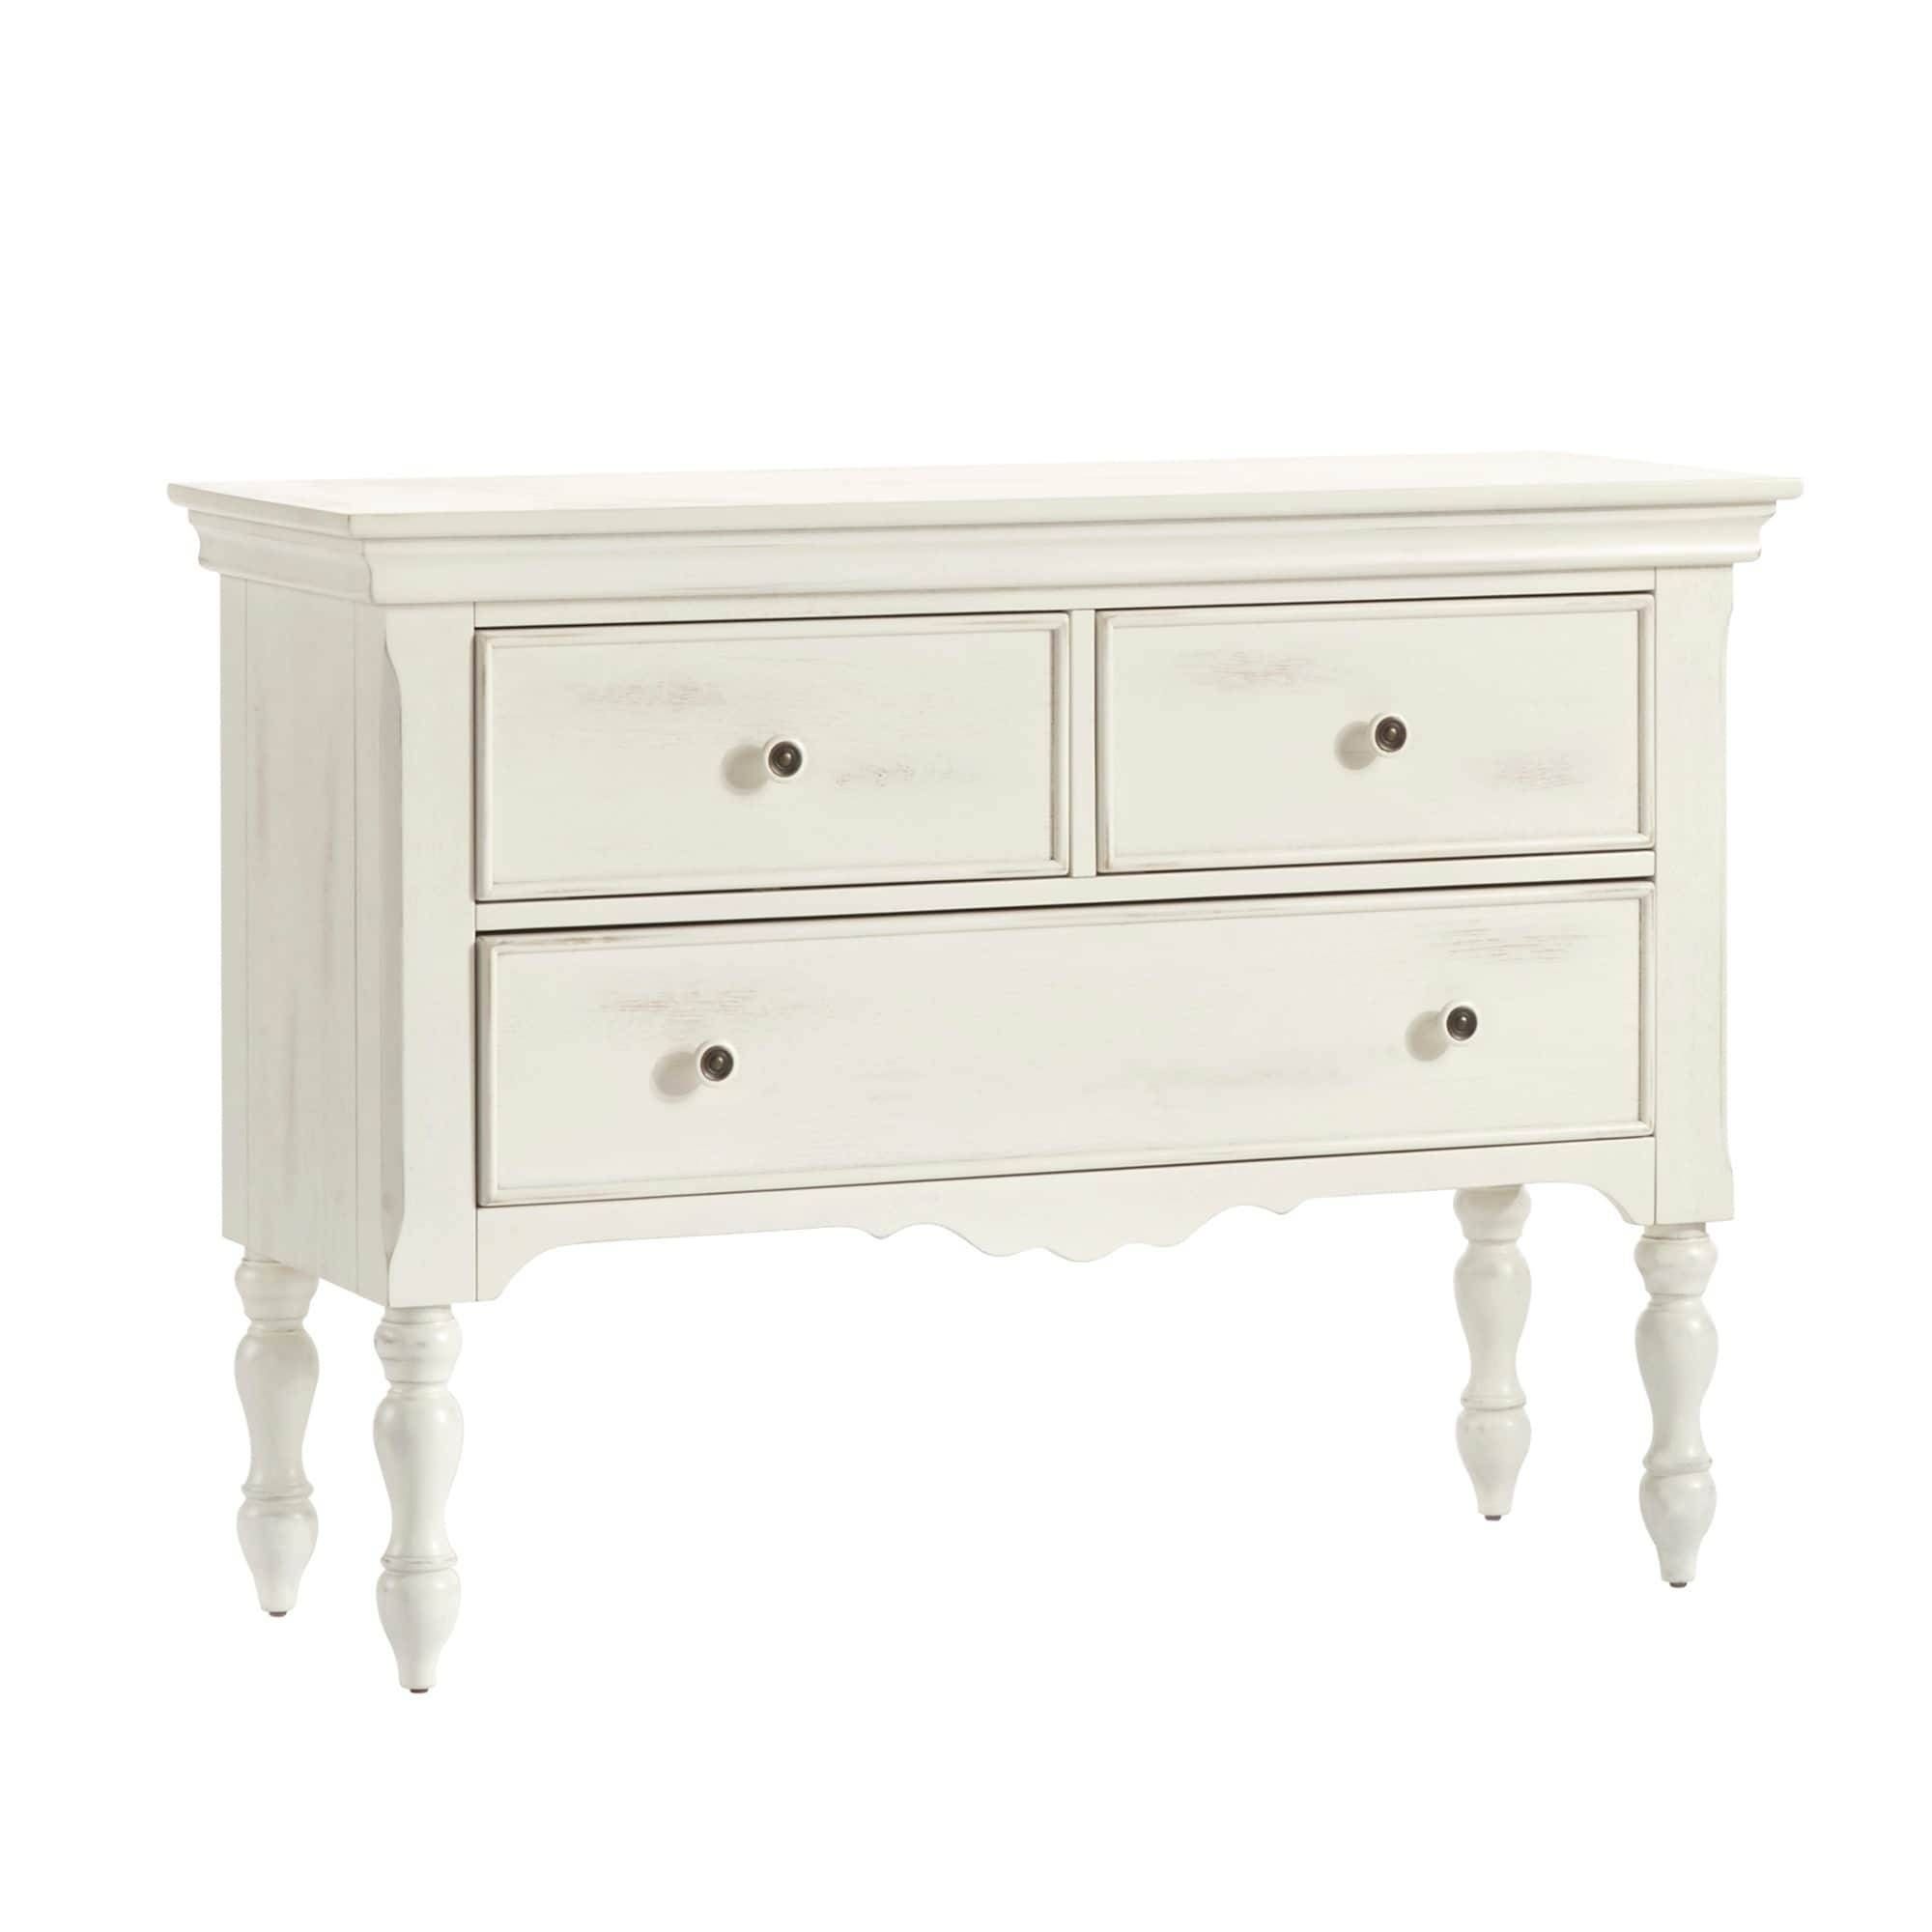 Mckay Country Antique White Buffet Storage Serverinspire Q For Current White Sideboard Tables (View 14 of 15)